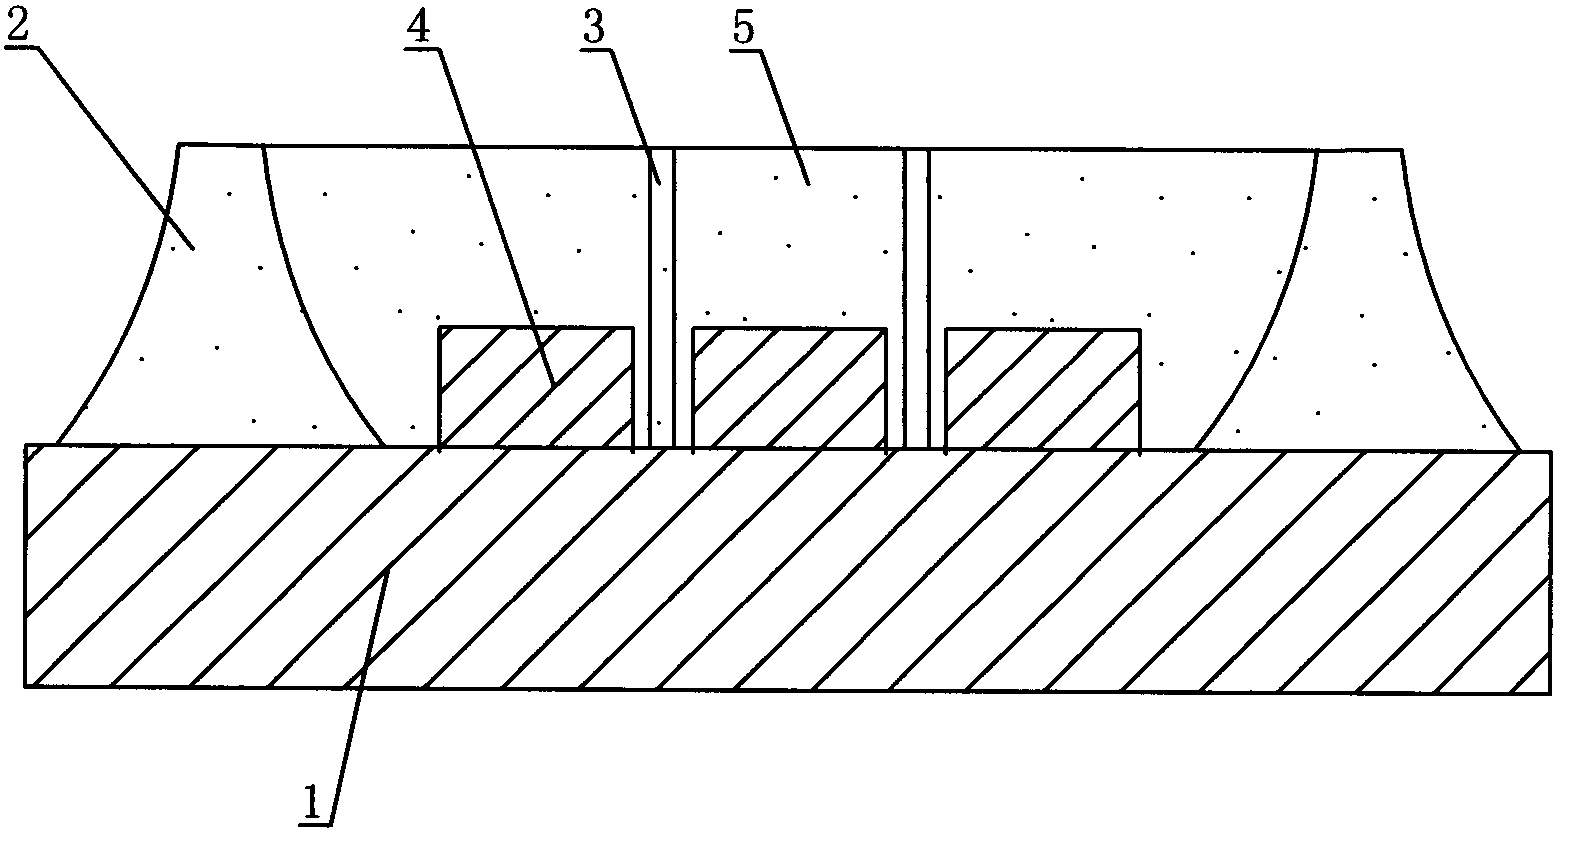 Chip scale integration packaging process and light emitting diode (LED) device